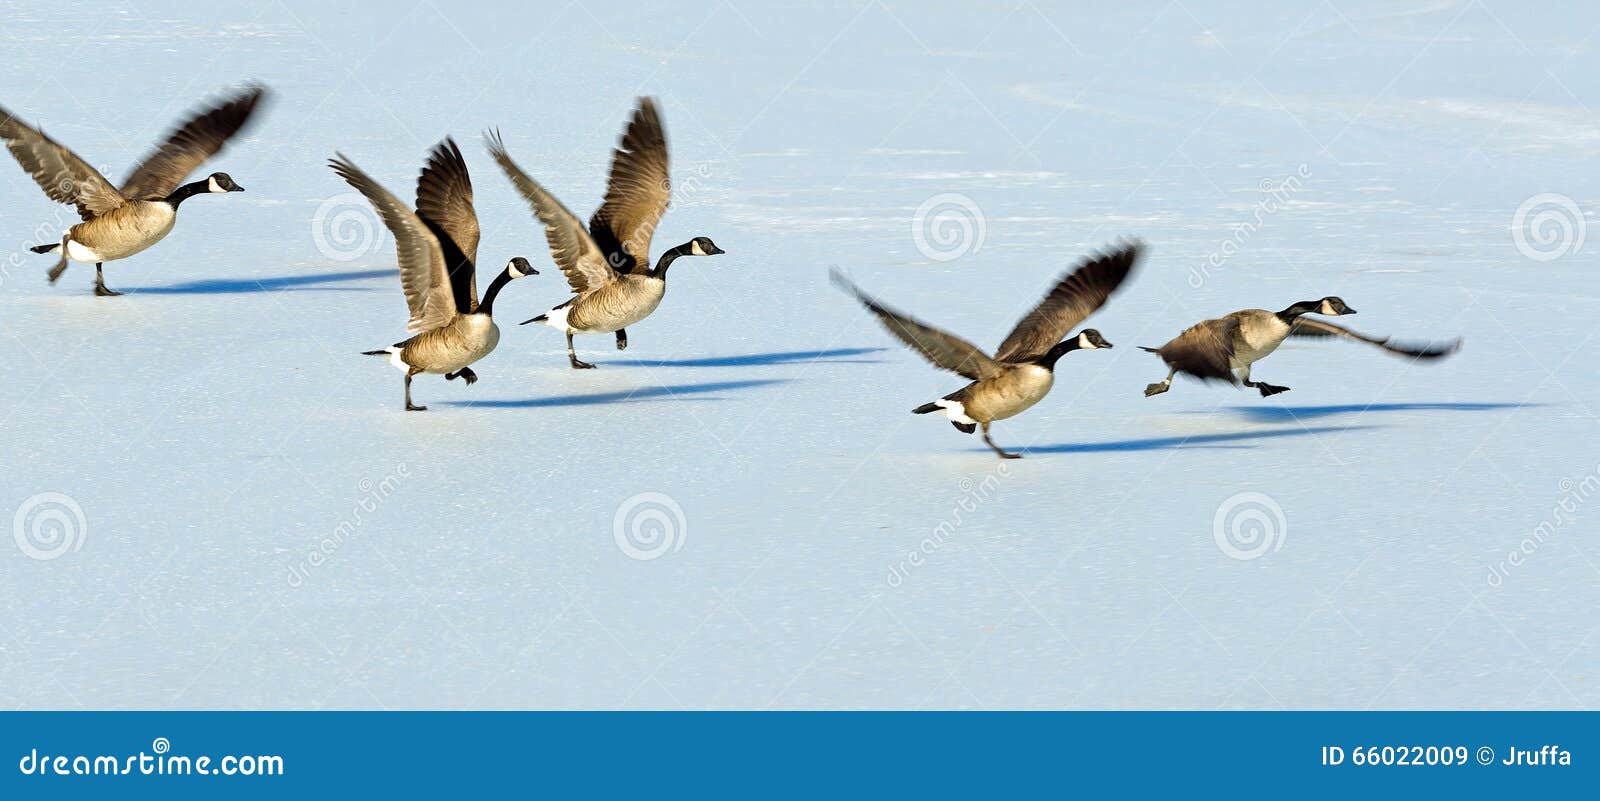 canadian geese taking flight over a frozen lake